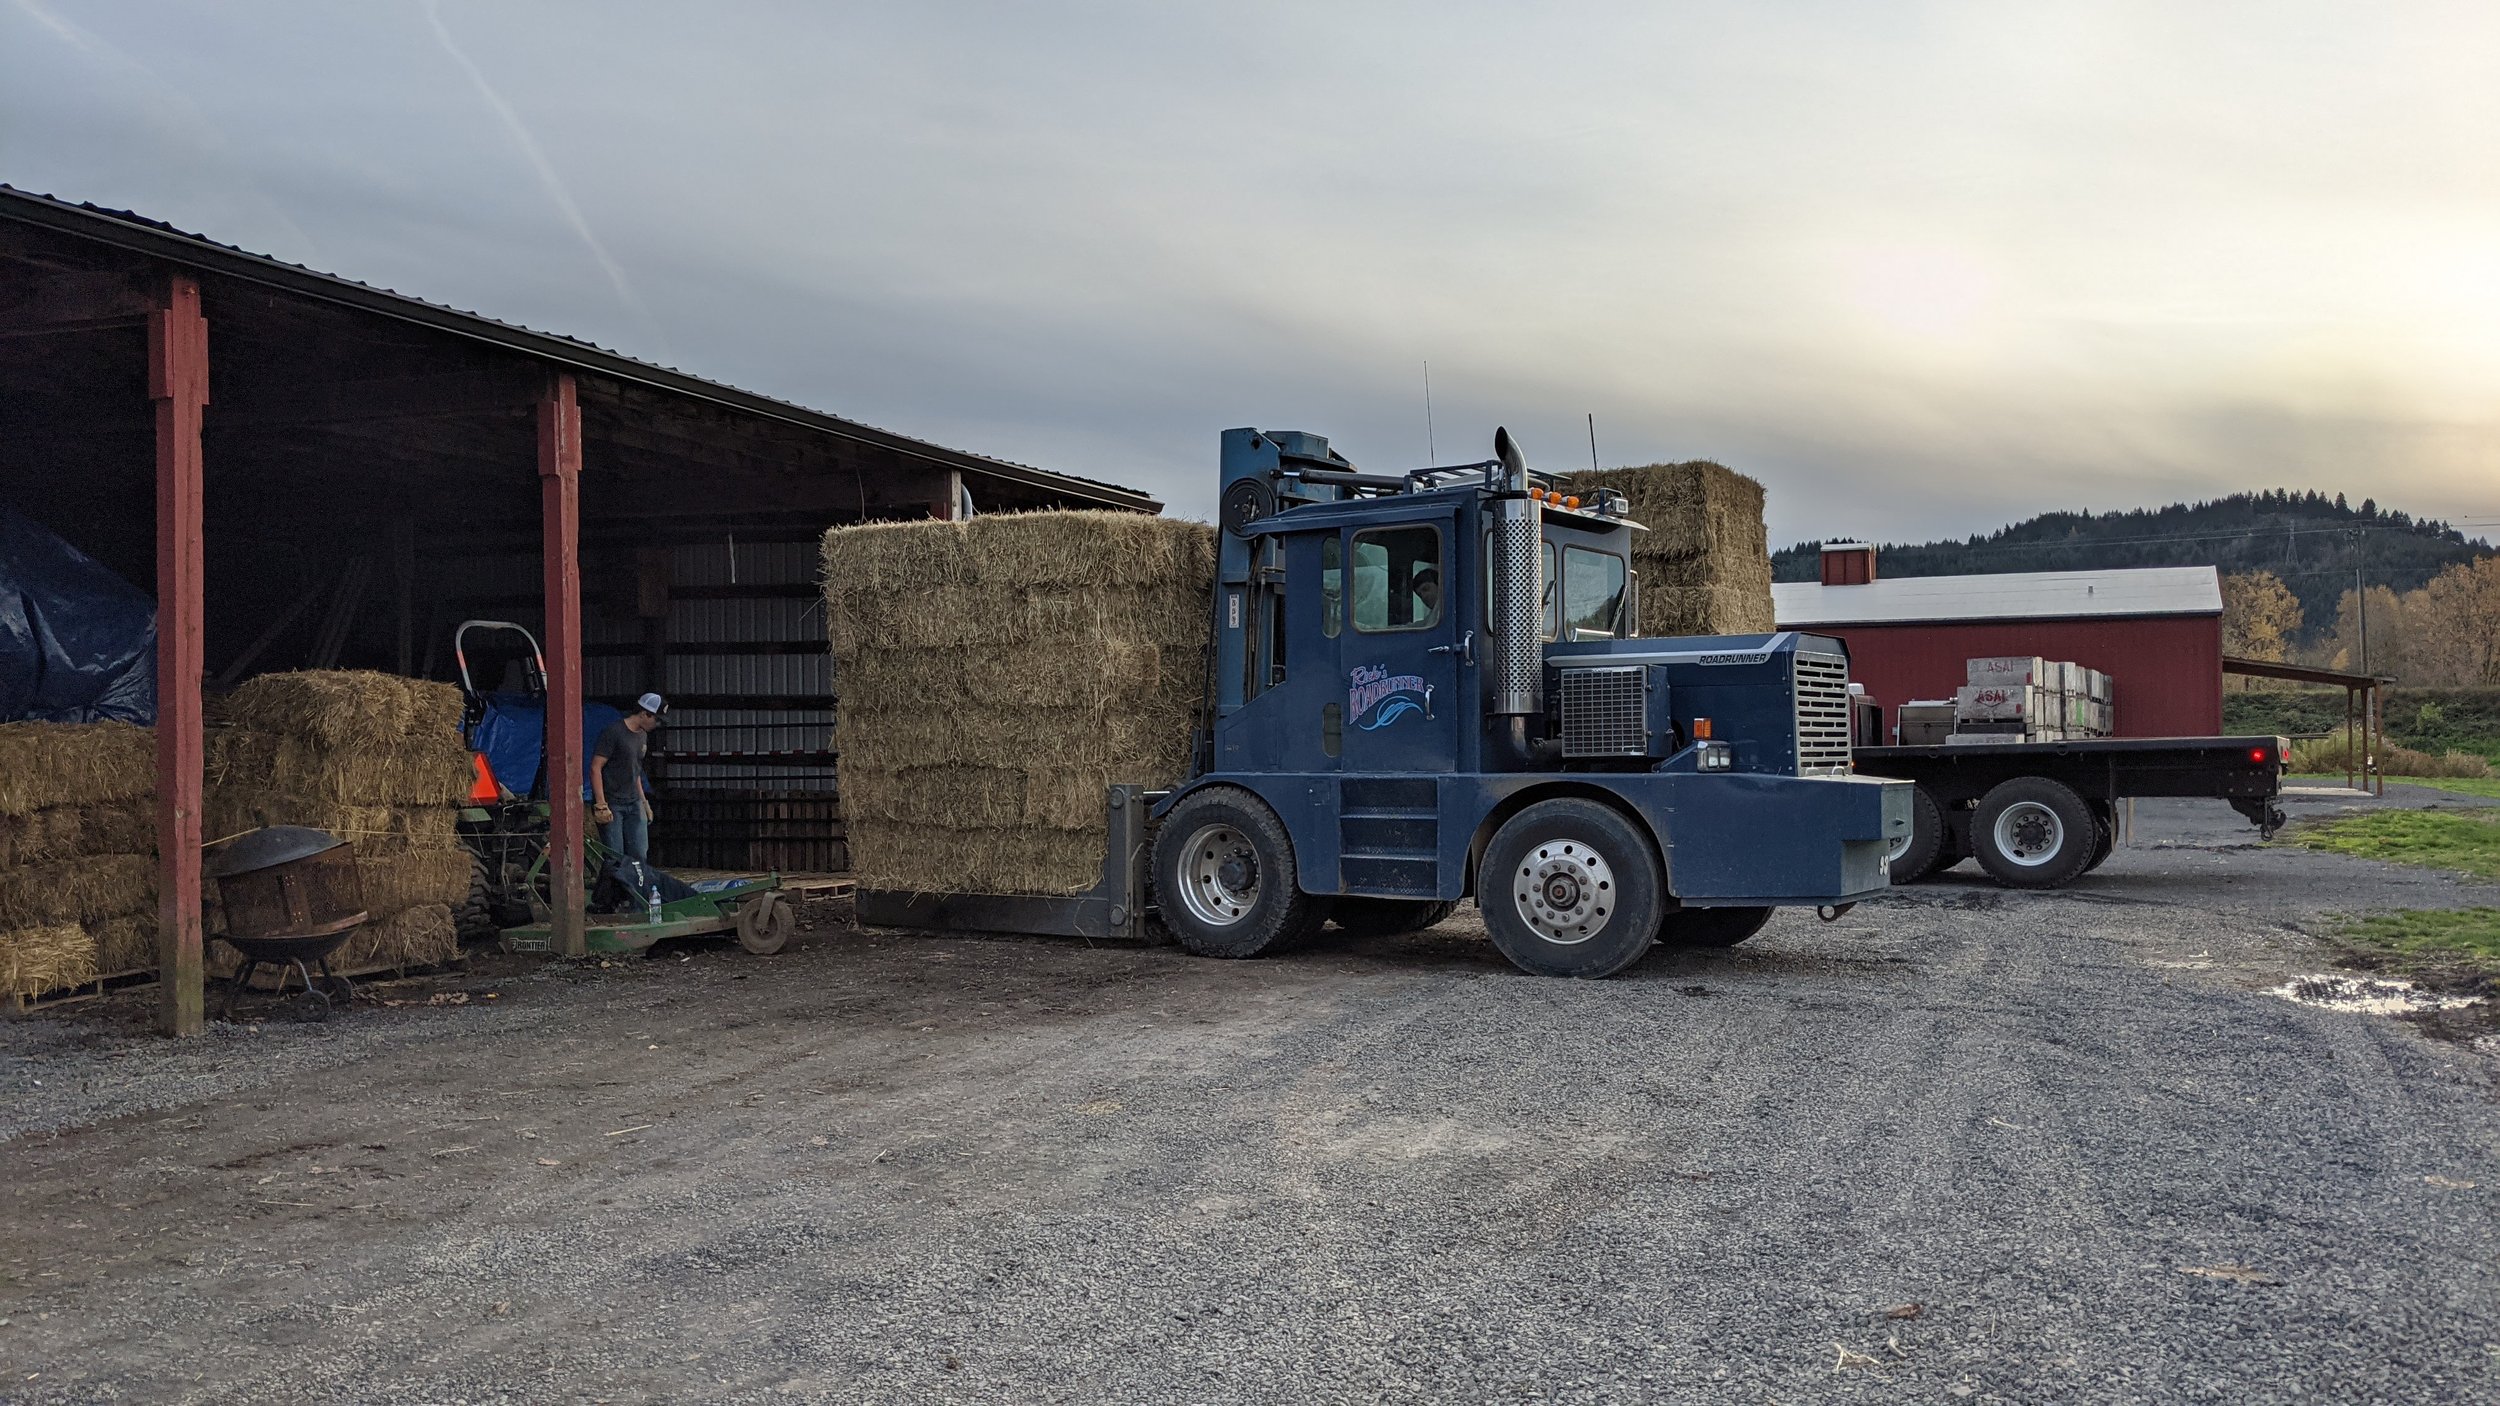  Stocking up on hay for all the animals to eat this winter, with the help of our friends at Hoffman Farms and neighbors, the Fazios. With the extreme heat this summer, there is a real shortage of hay for feed. And what hay is available is very expens